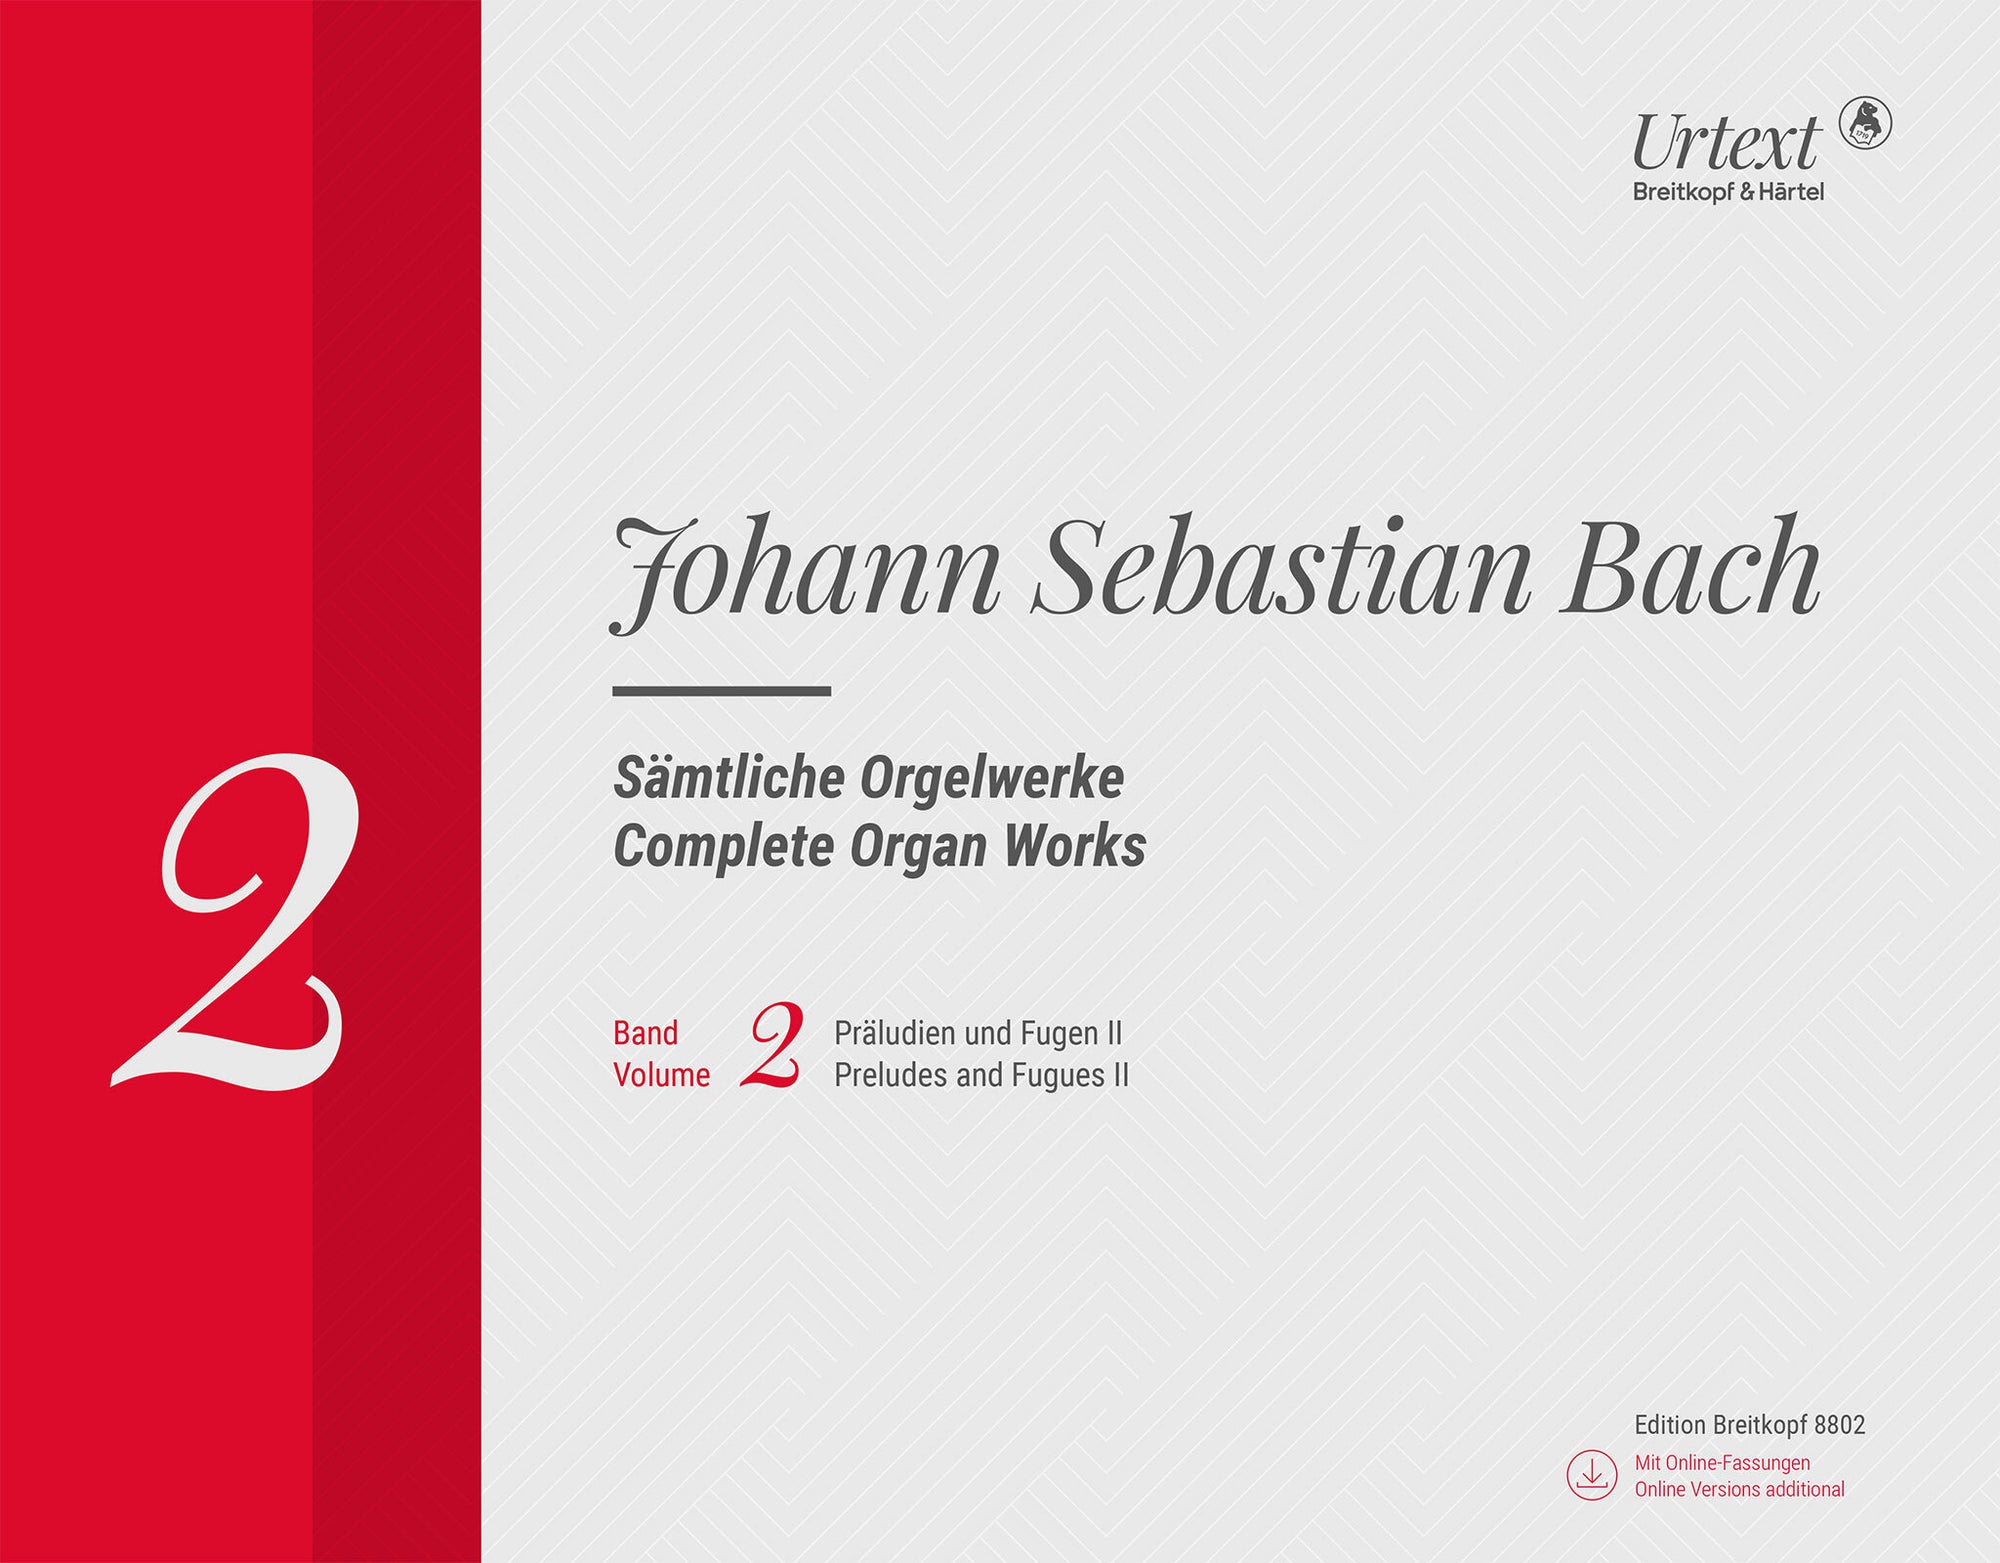 Bach: Complete Organ Works - Volume 2 (Preludes and Fugues - Part 2)